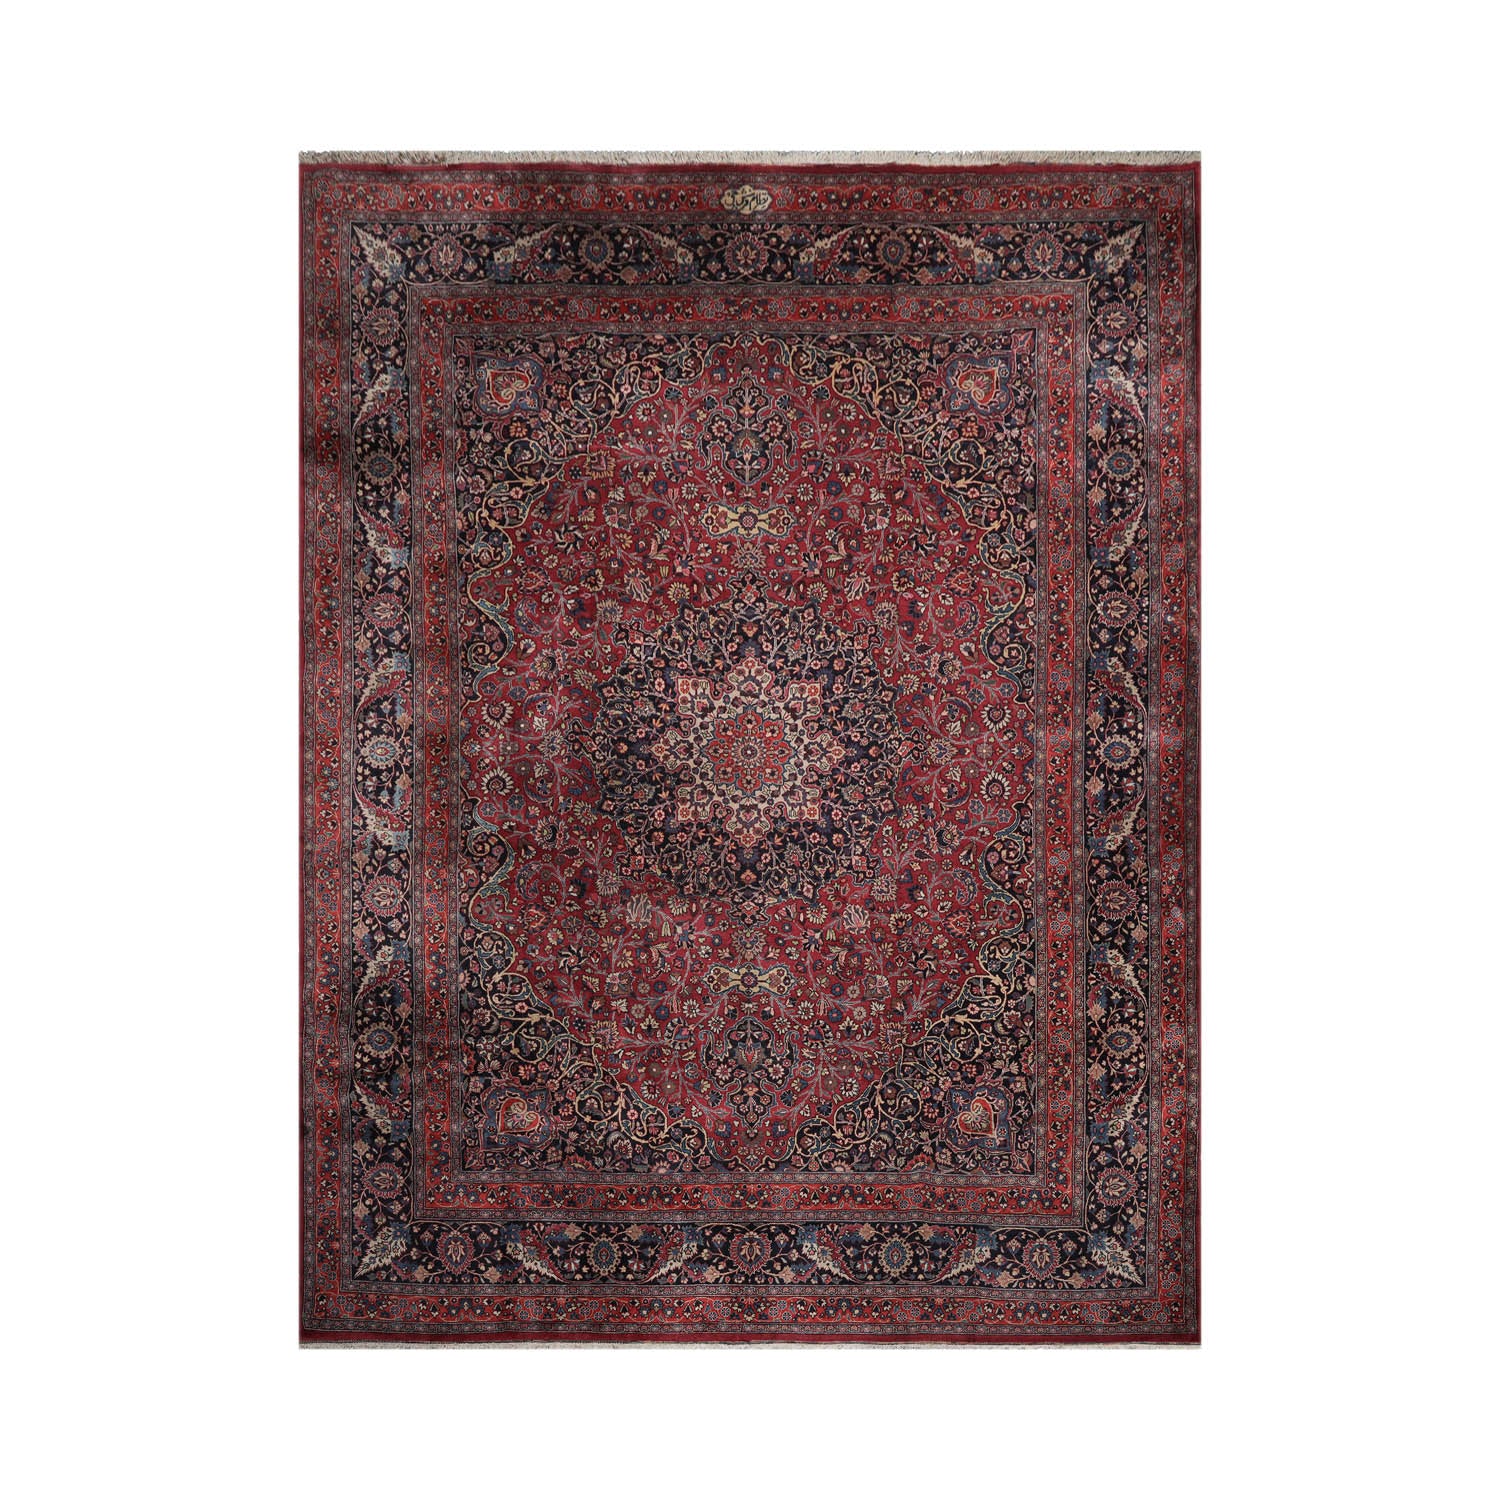 Talmage Palace Hand Knotted 100% Wool Tabriz Traditional Oriental Area Rug Burgundy, Midnight Blue Color